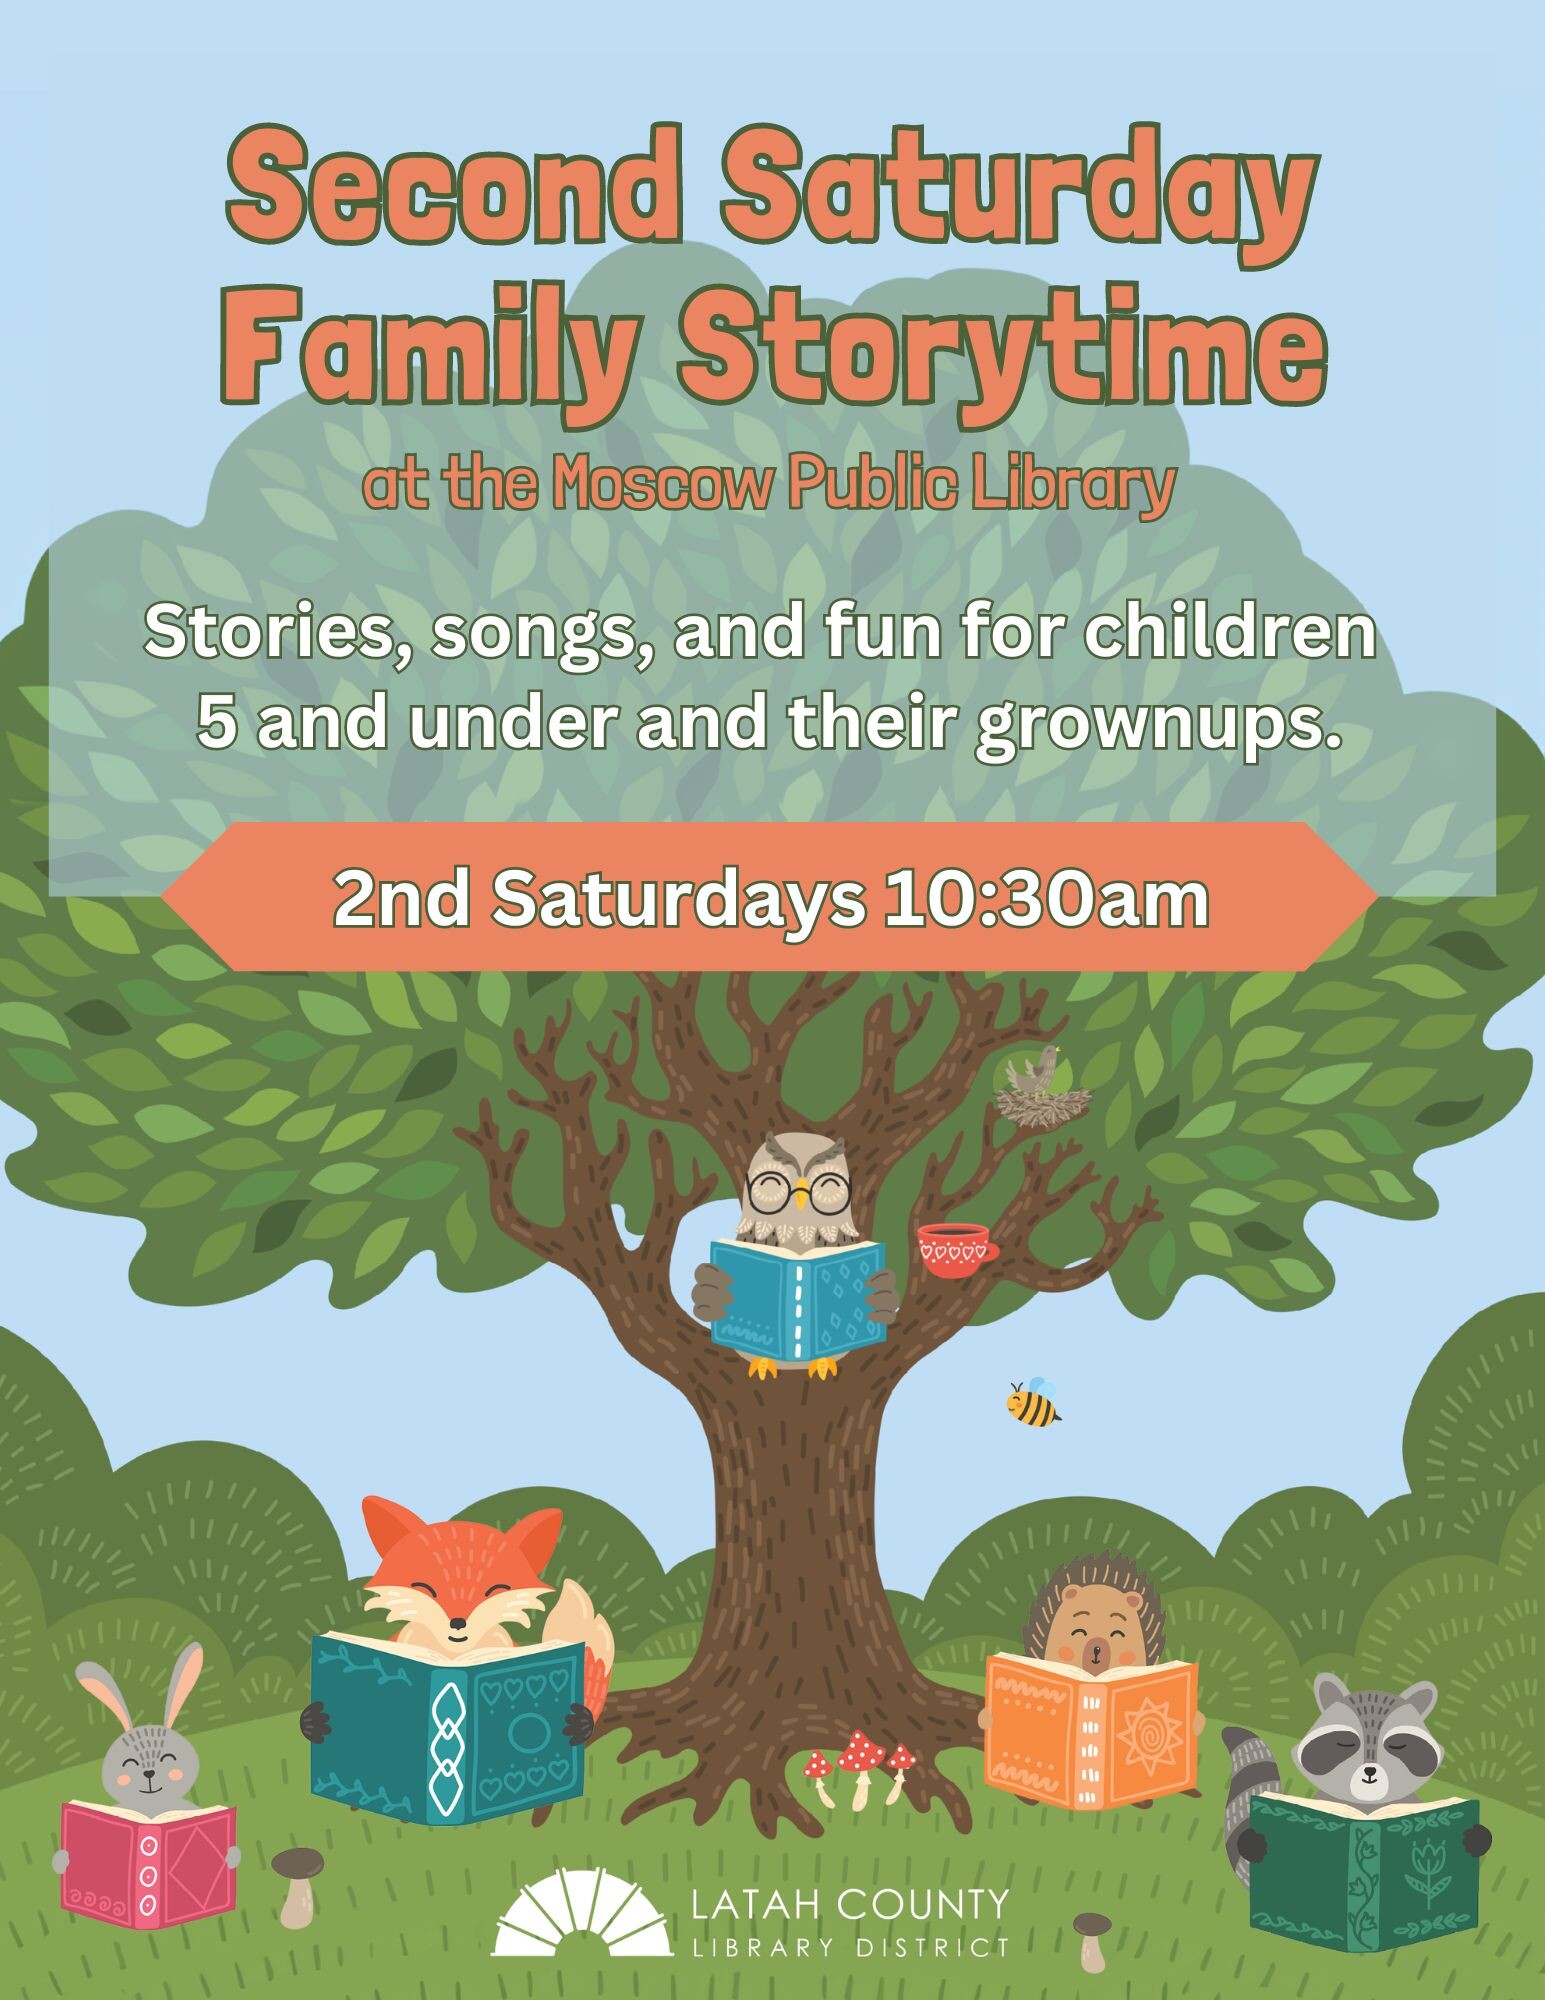 Second Saturday Family Storytime at the Moscow Public Library